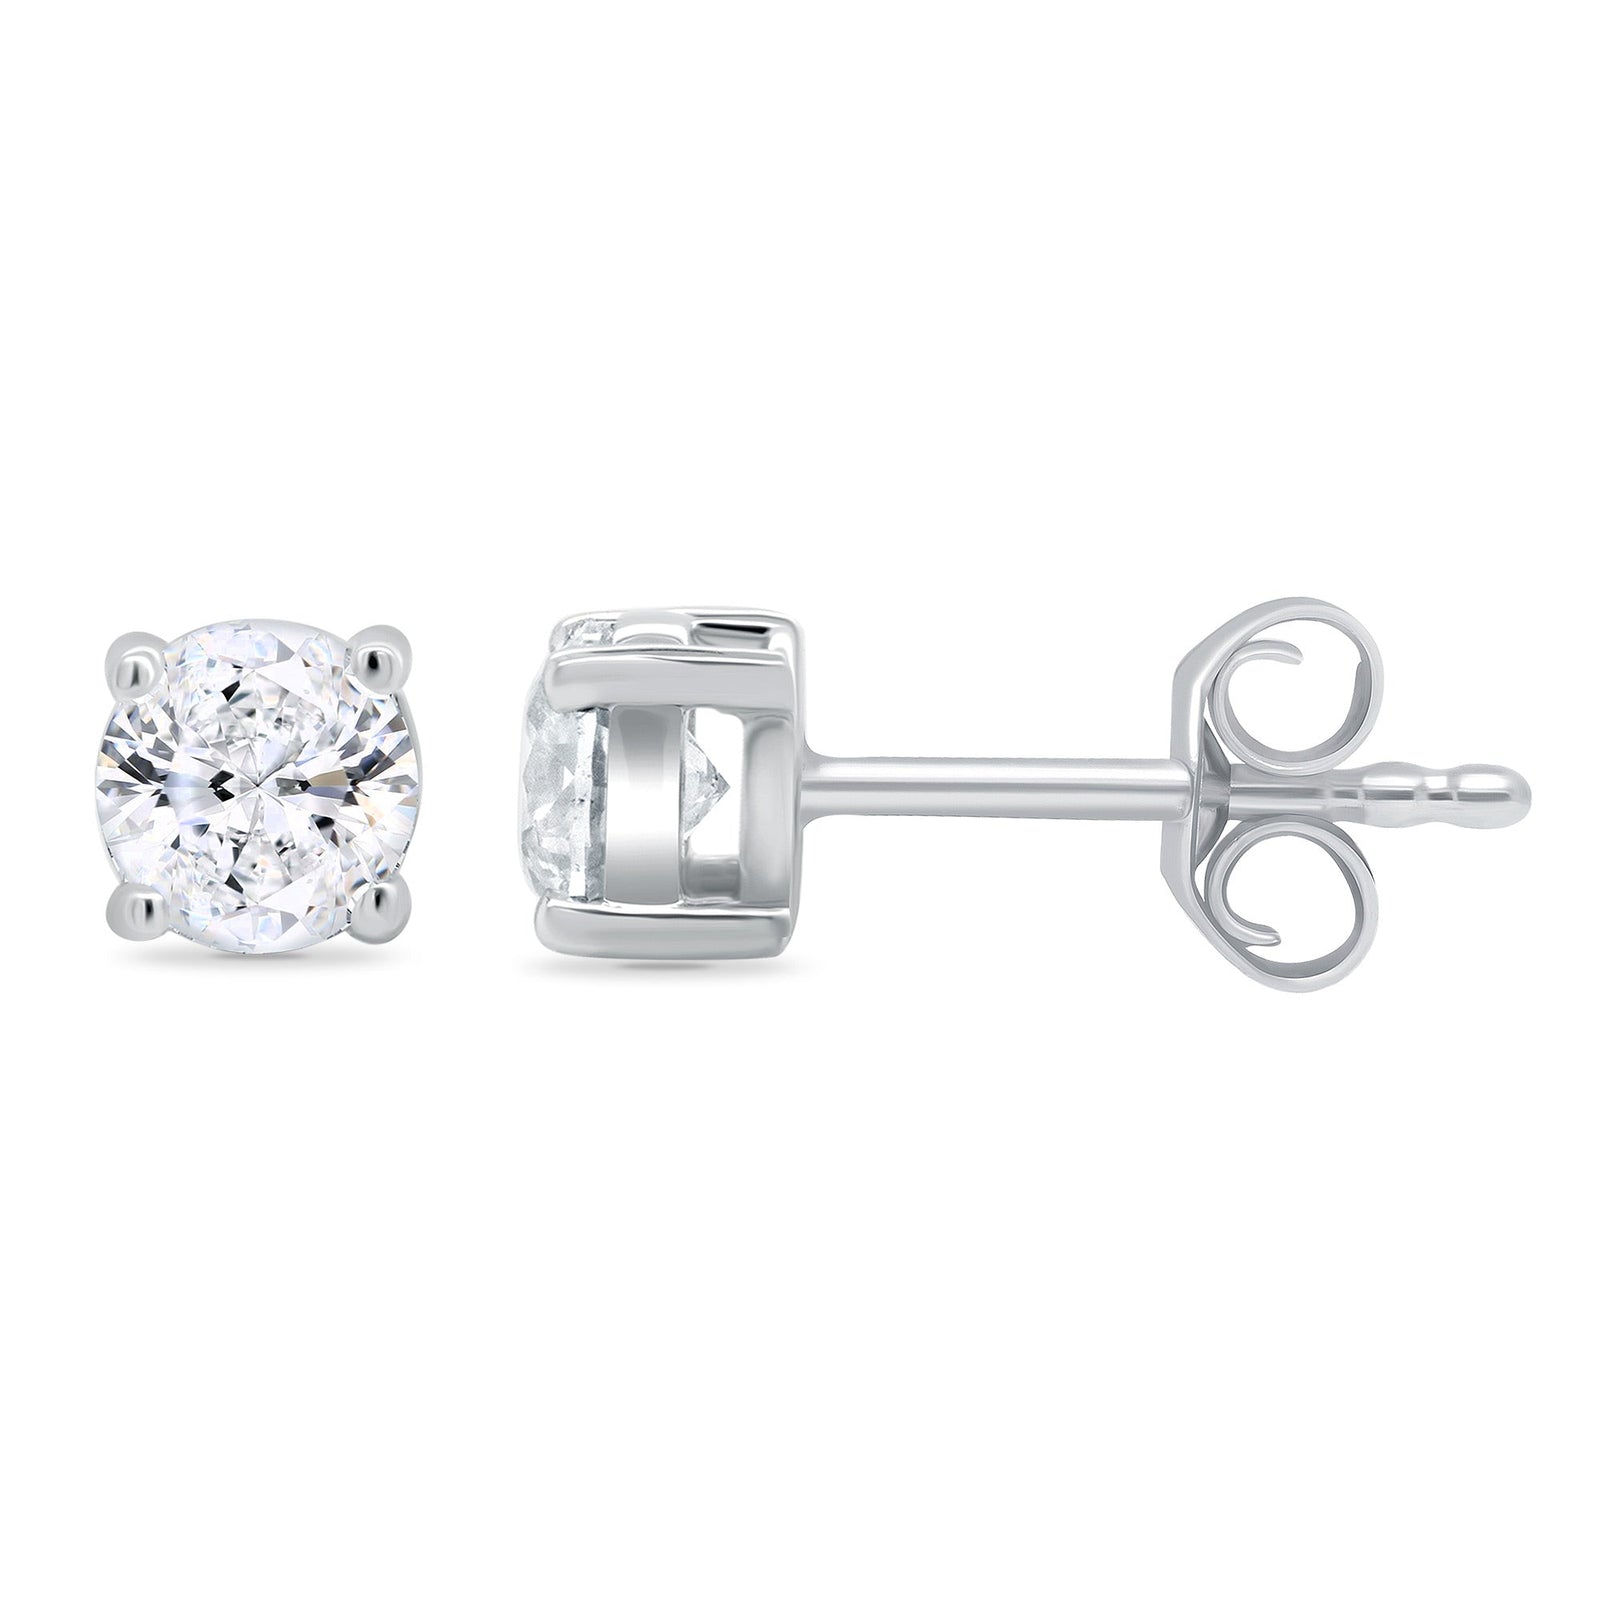 9ct white gold four claw diamond stud earrings 0.25ct